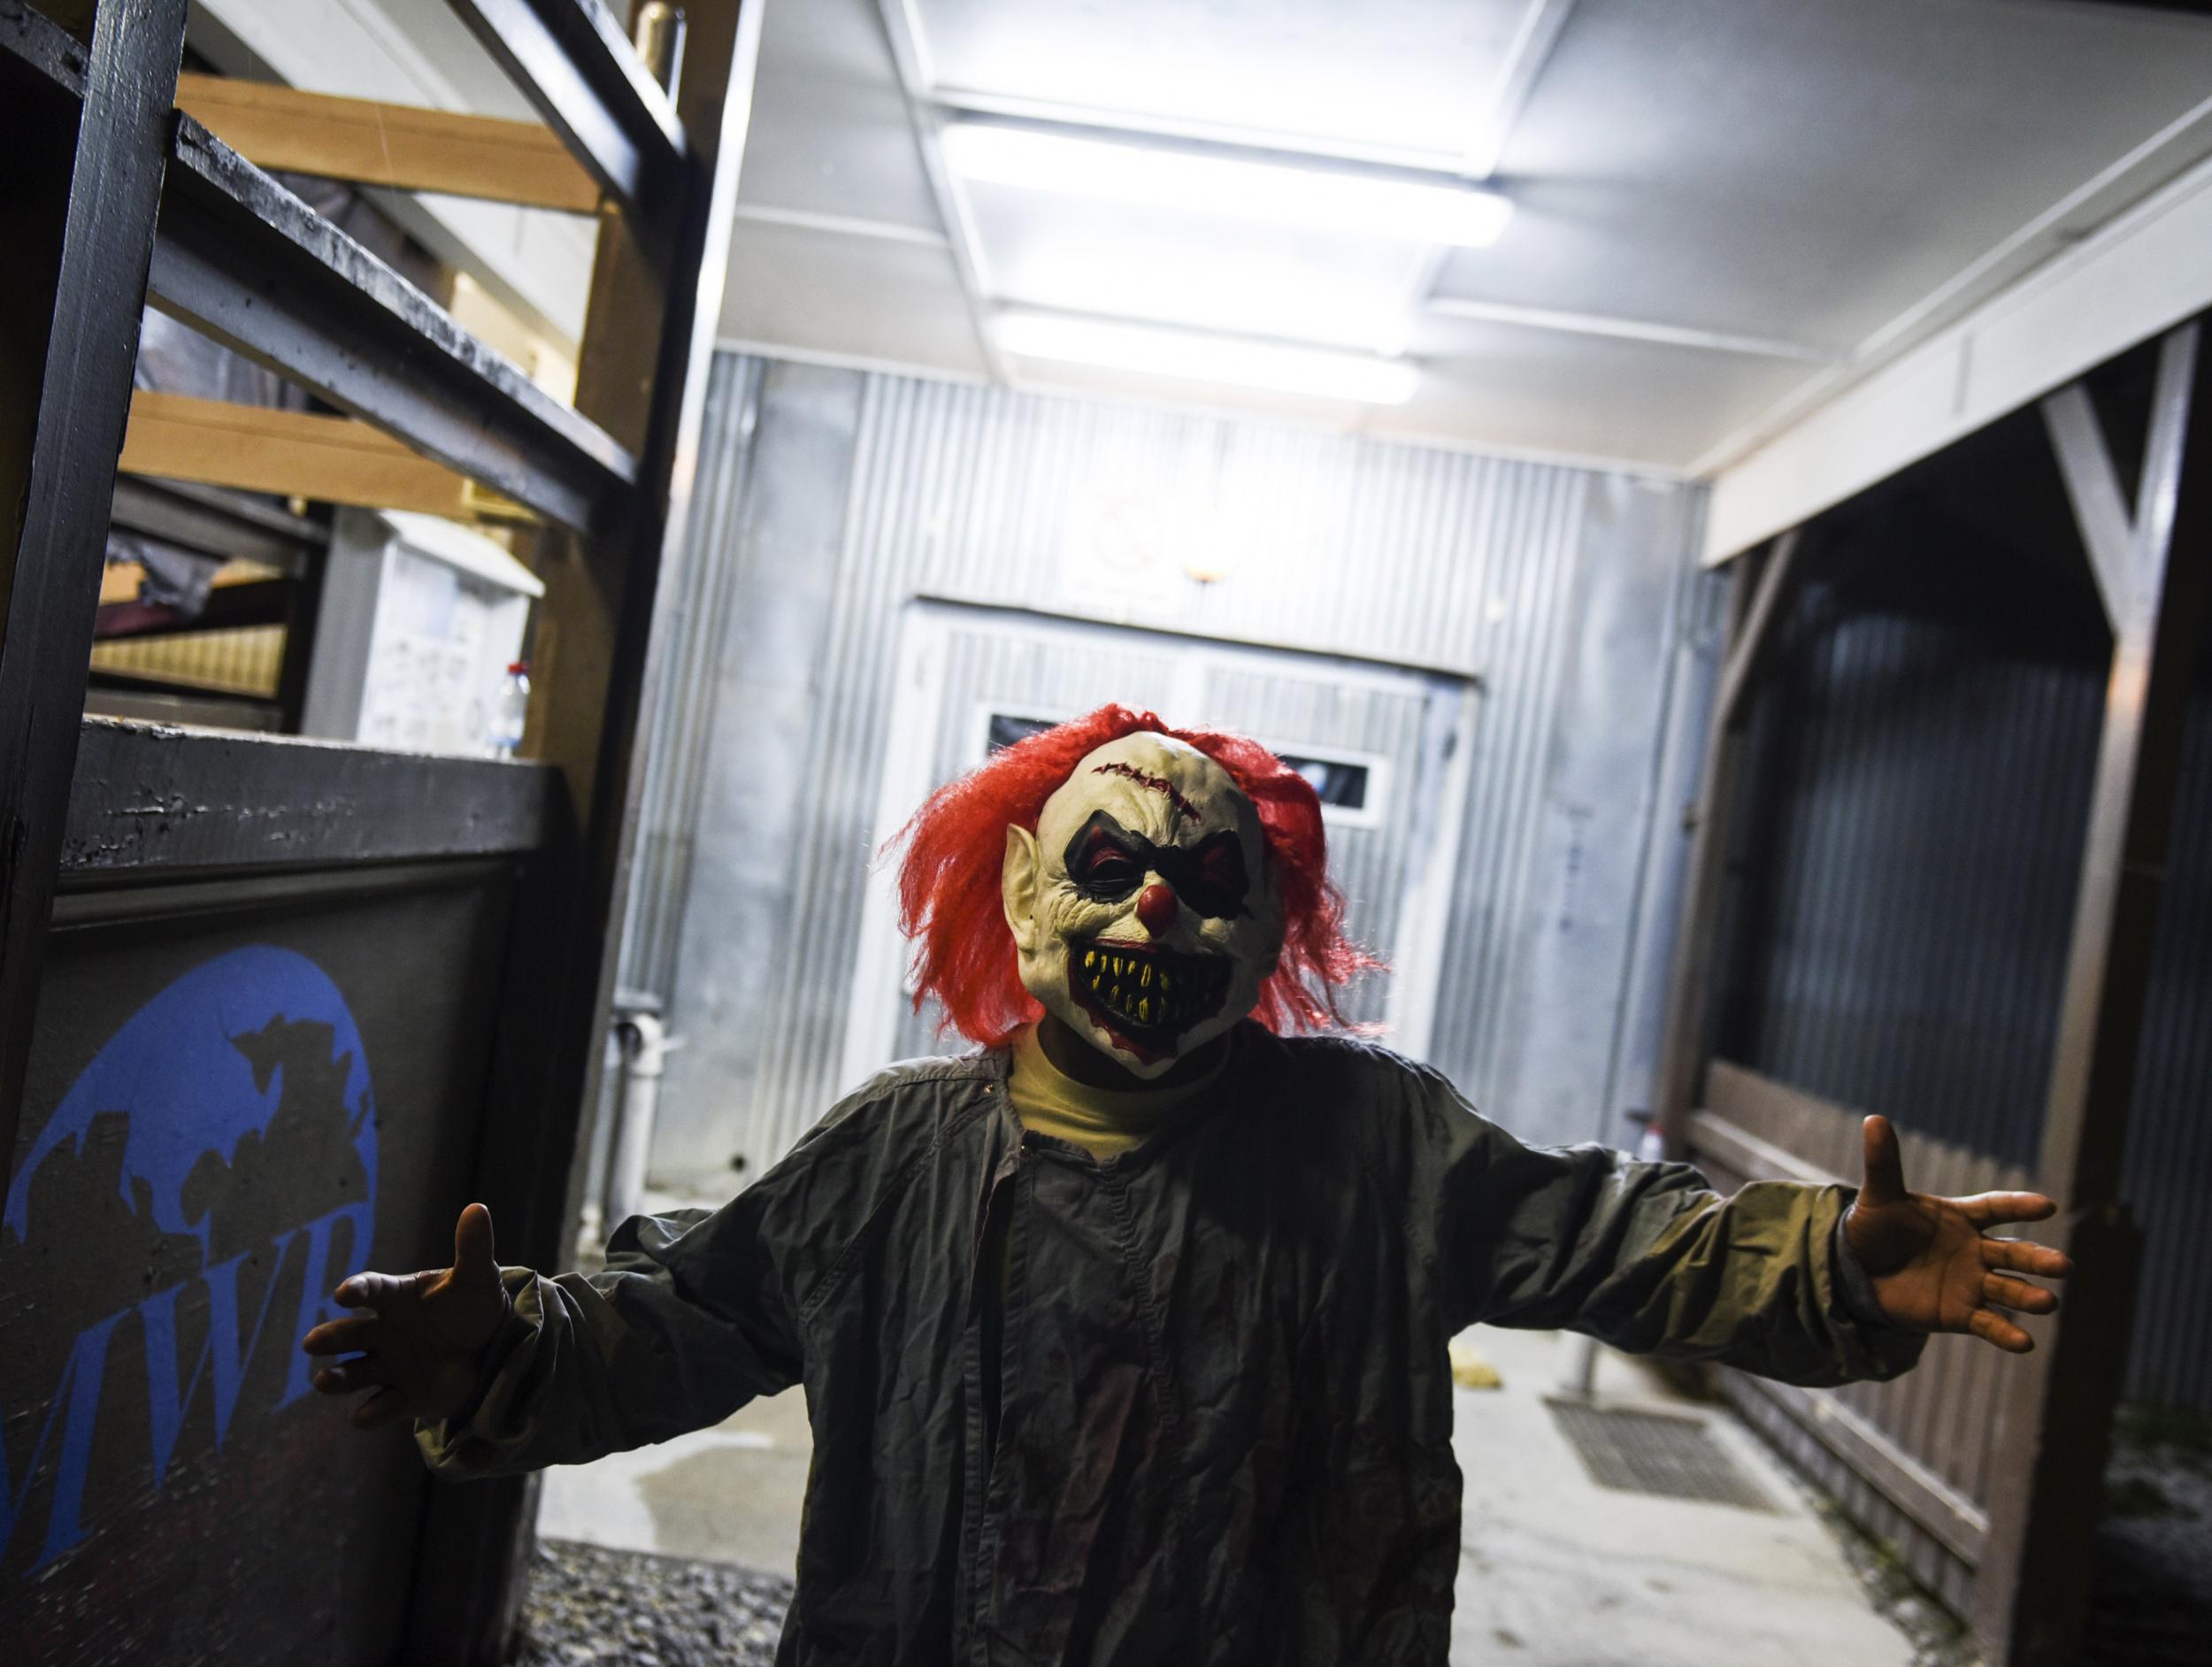 The Killer Clowns Craze Tells Us Something Very Troubling About